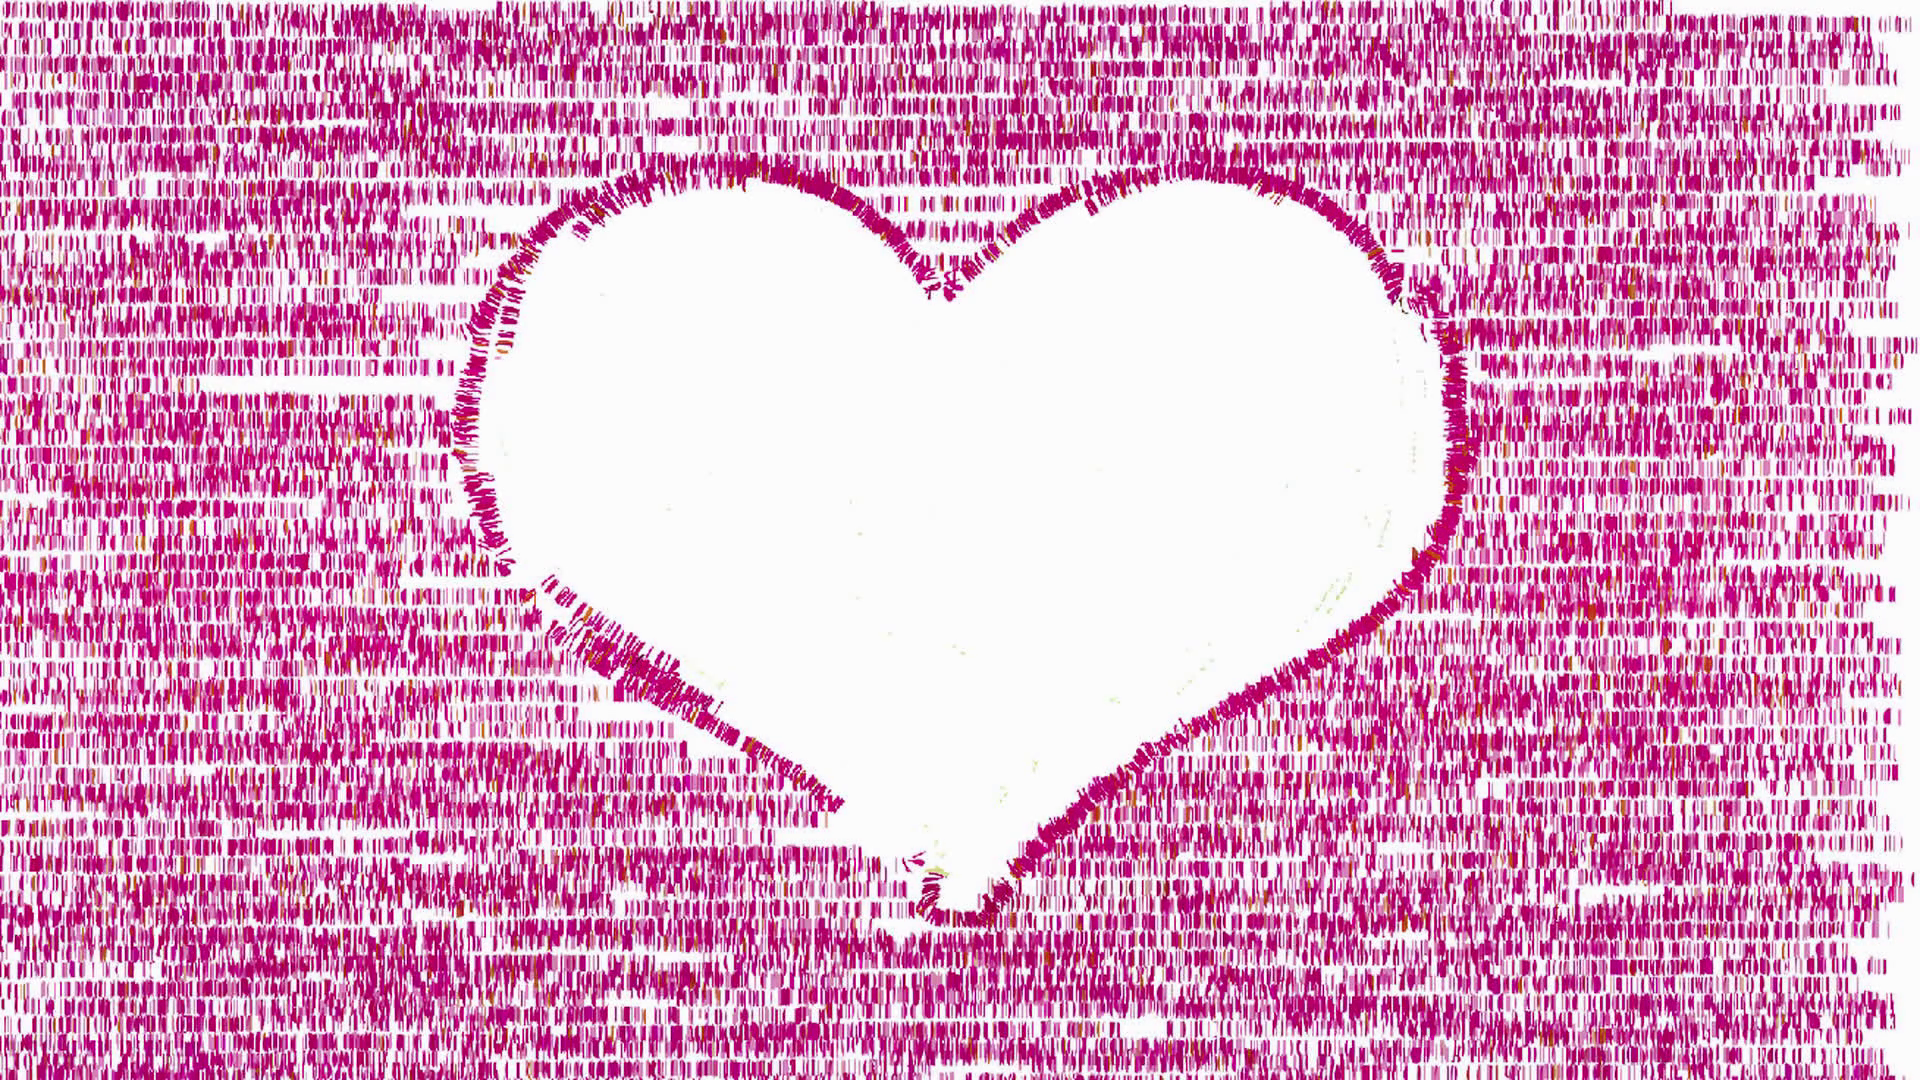 White Heart Symbol On Abstract Background Forms By Animated Pink